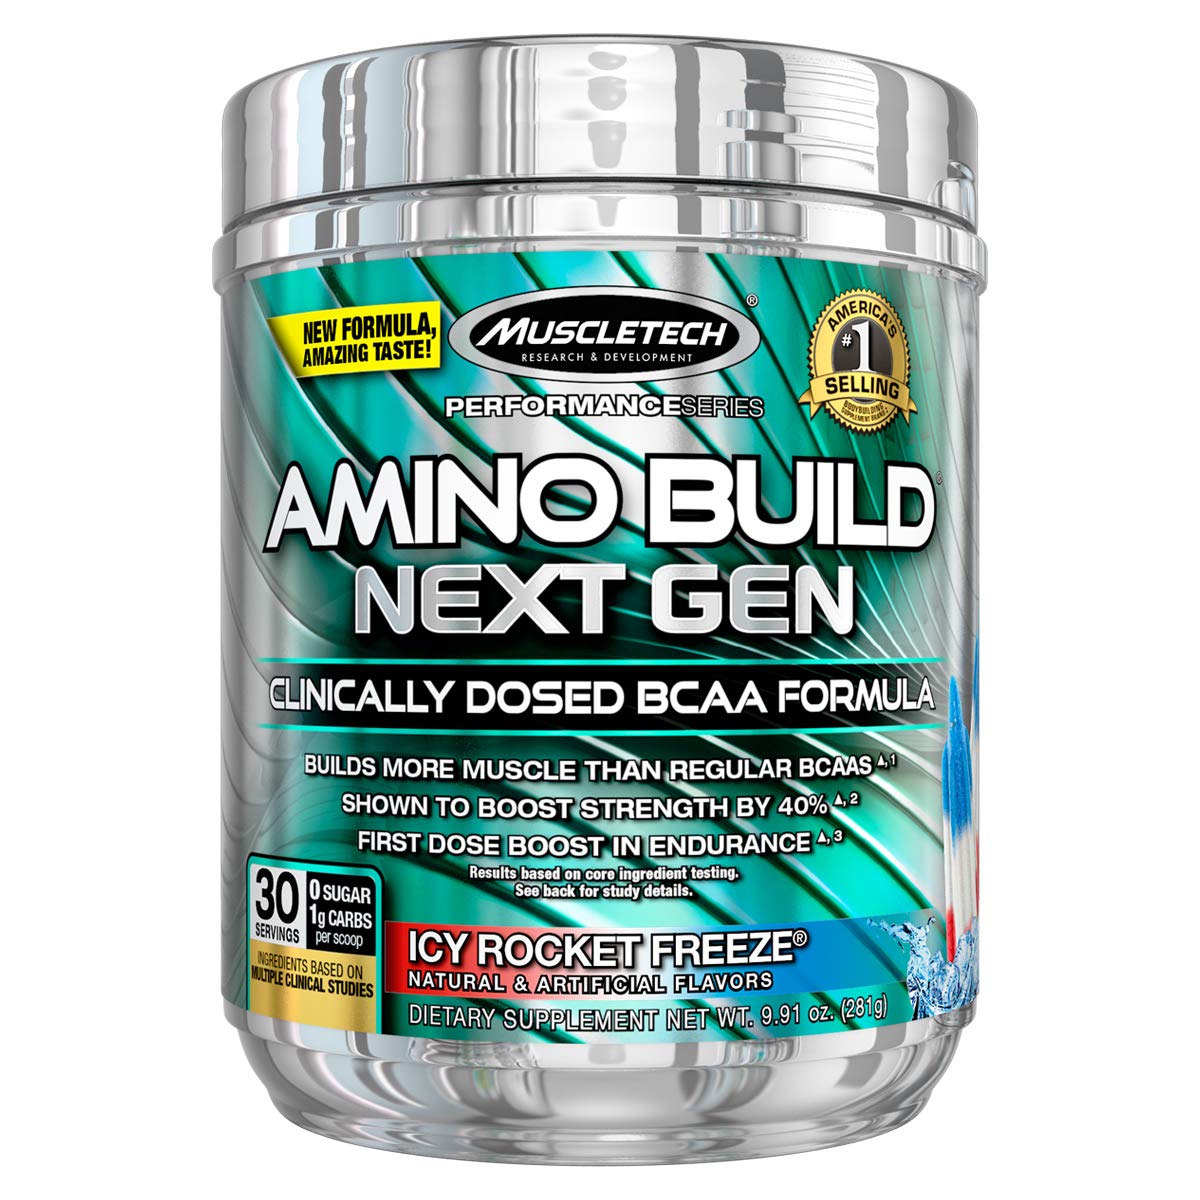 MuscleTech Amino Build Next Gen Energy Supplement, Formulated with BCAA Amino Acids, Betaine, Vitamin B12 & B6 for Muscle Strength & Endurance, Icy Rocket Freeze, 30 Servings (282g)